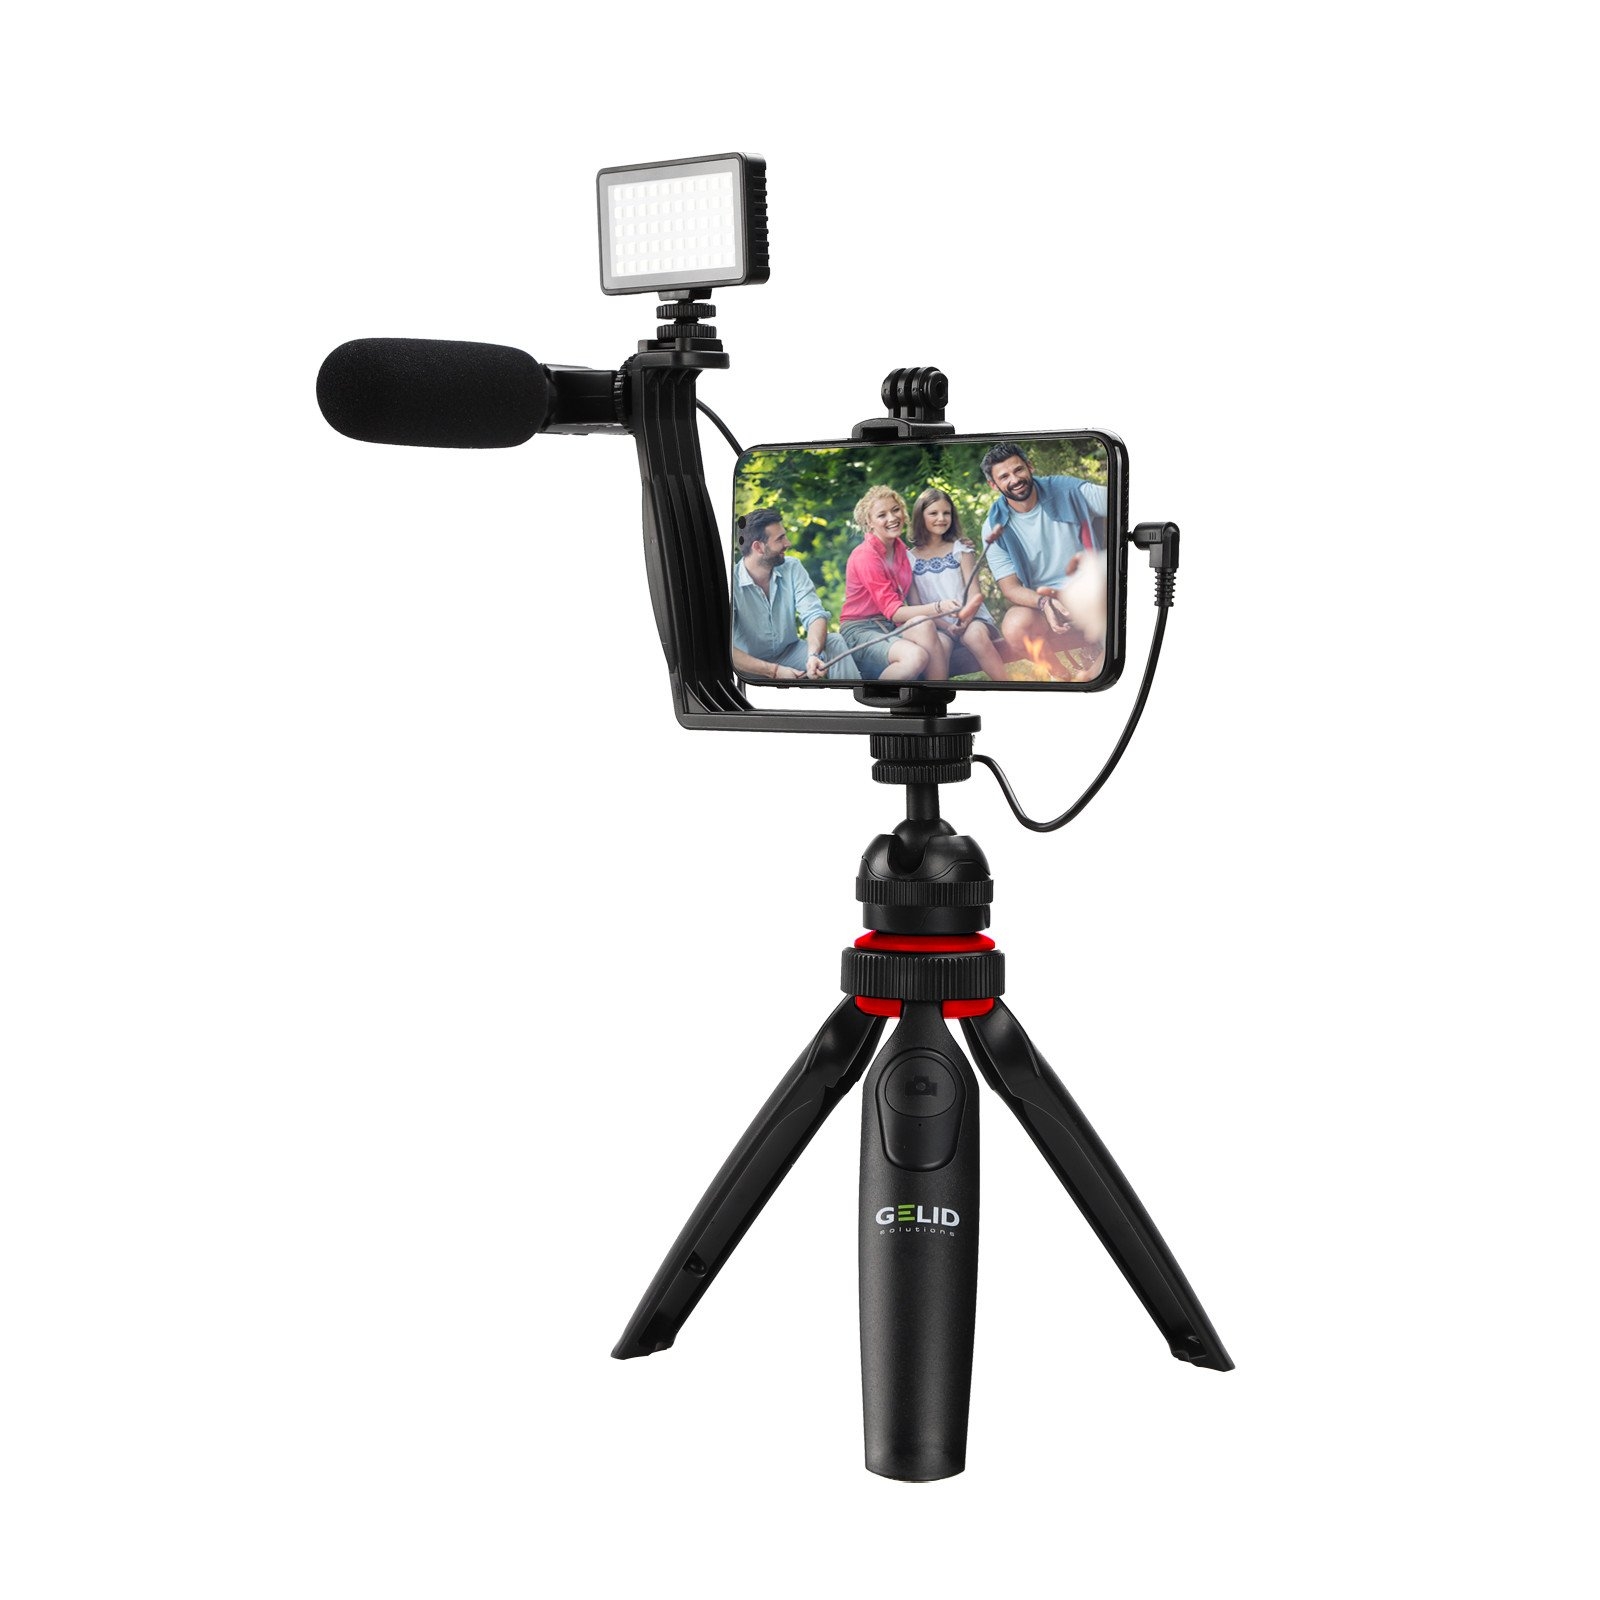 ST-ONA-01 ON AIR ALL IN ONE MOBILE STREAMING KIT/TRIPOD GELID